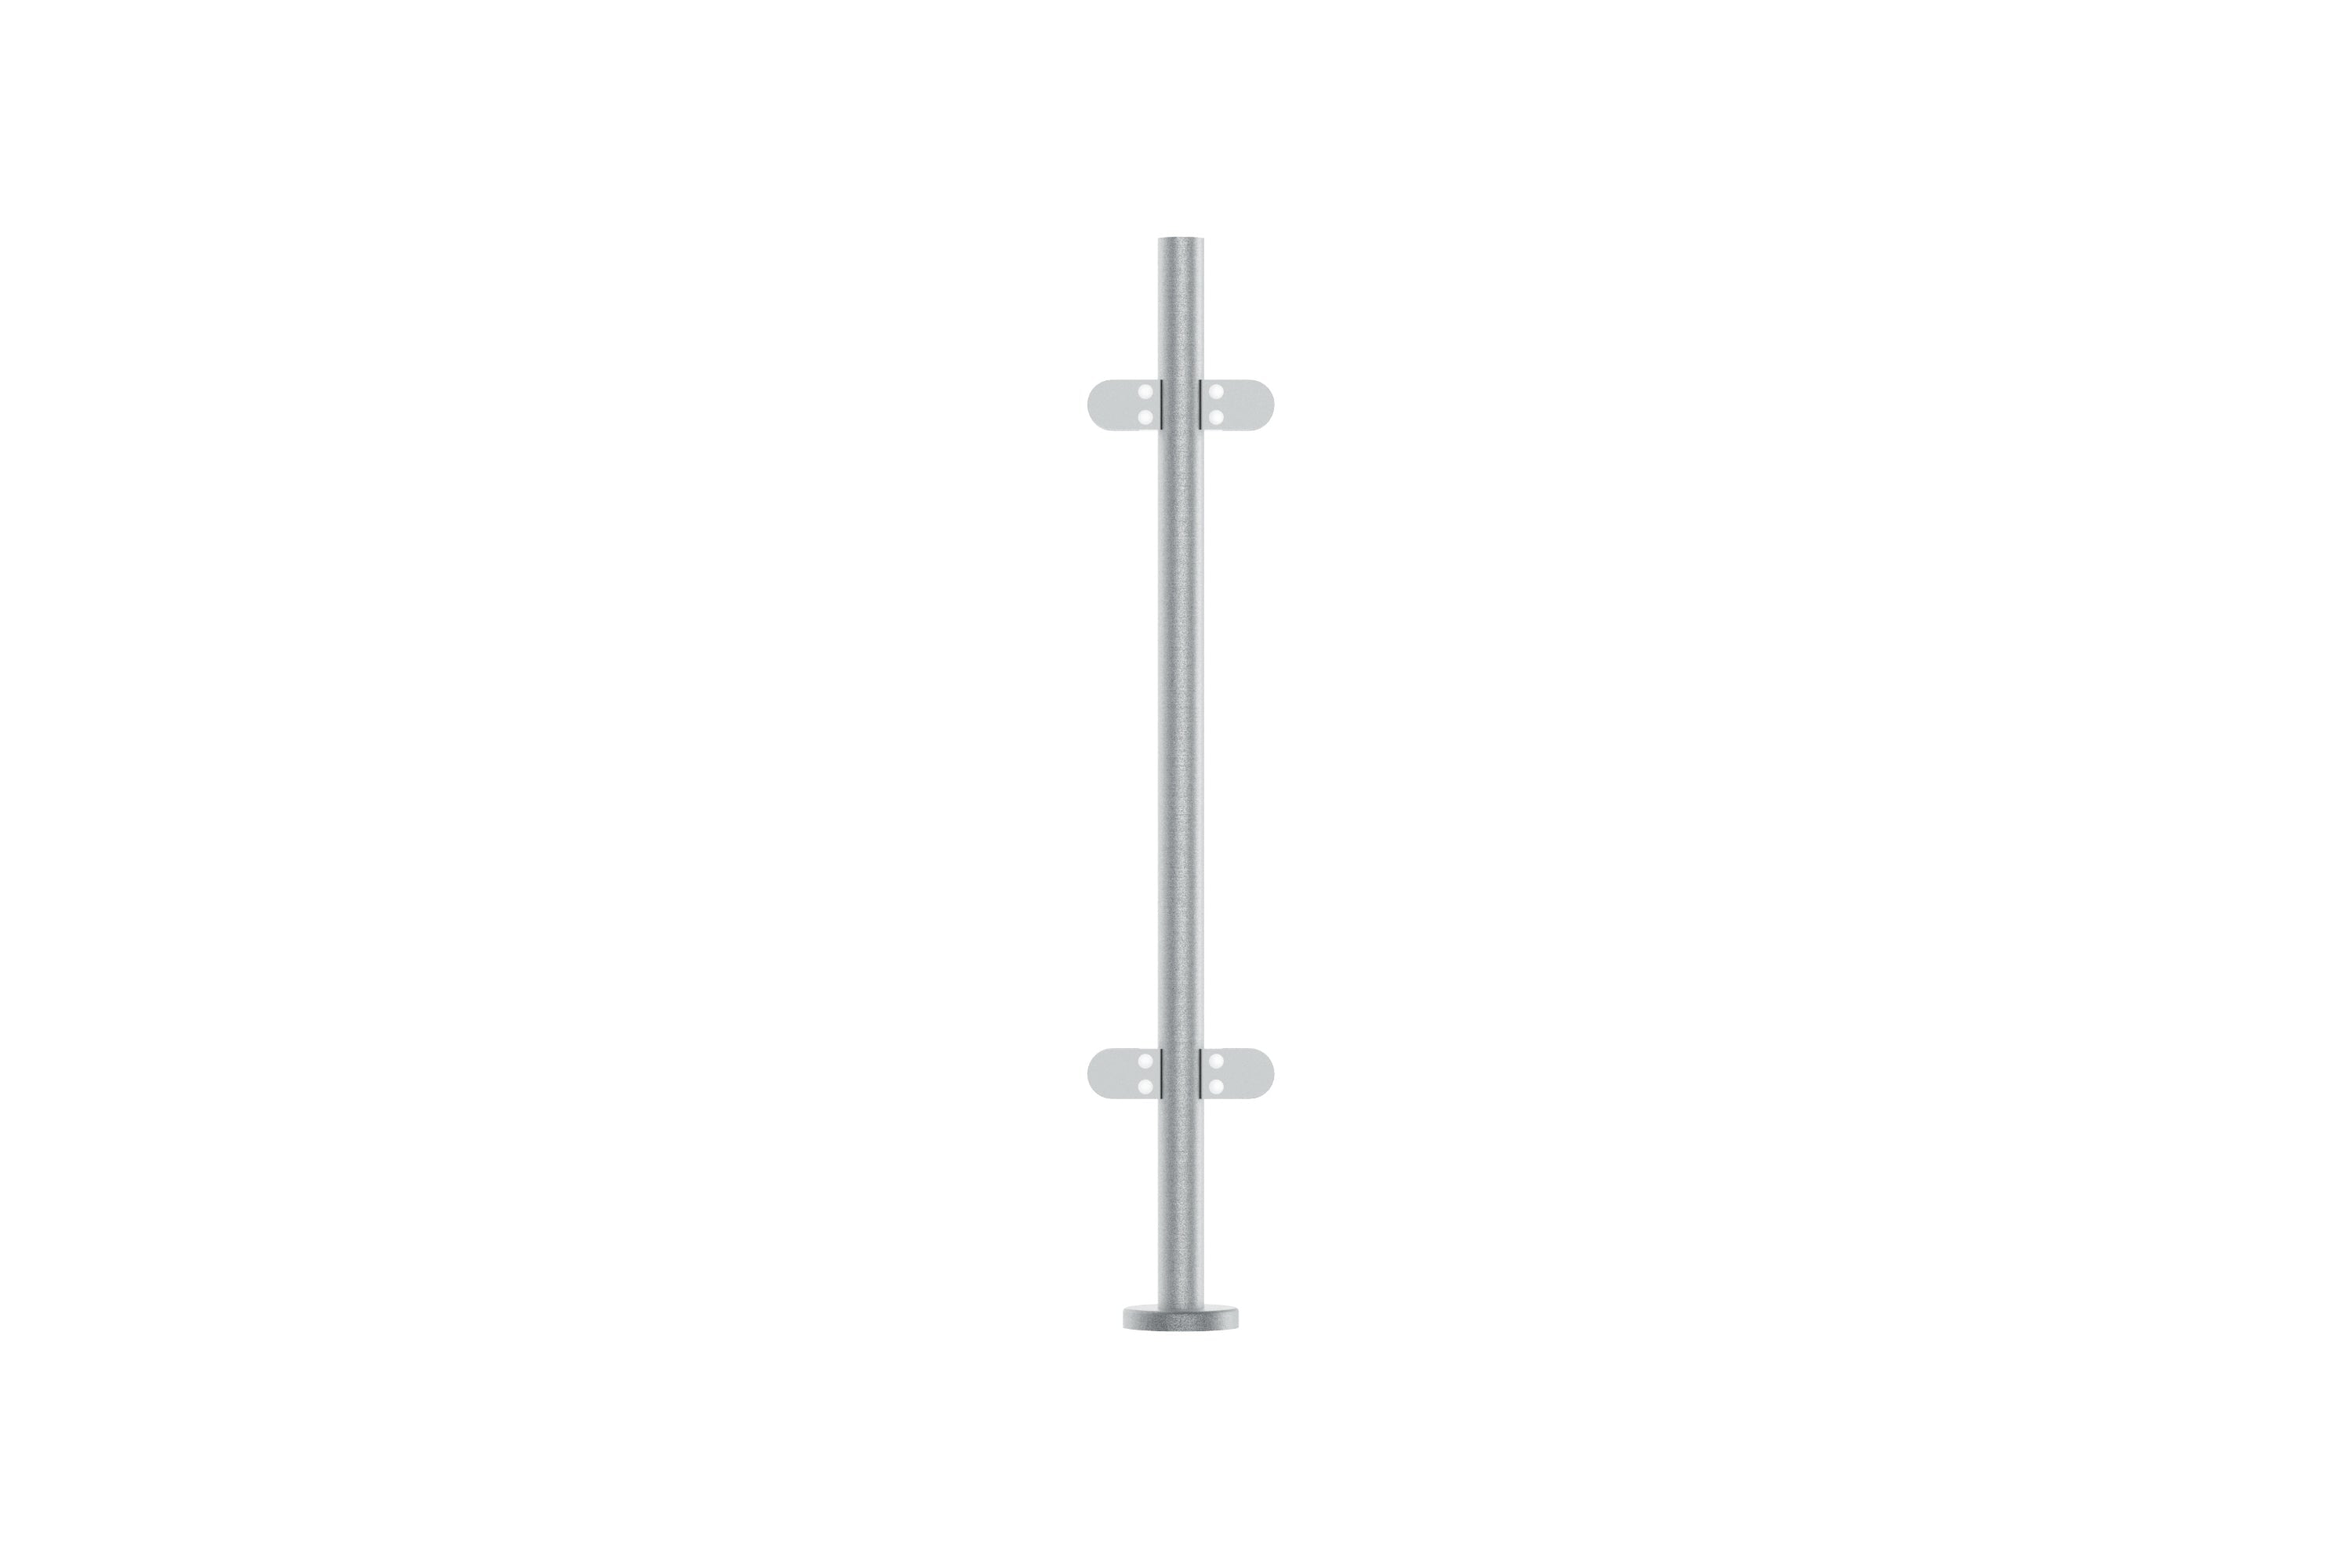 Glass Balustrade 42.4mm Mid Post Fully Assembled 978mm Long - Plain Top | Stainless 316